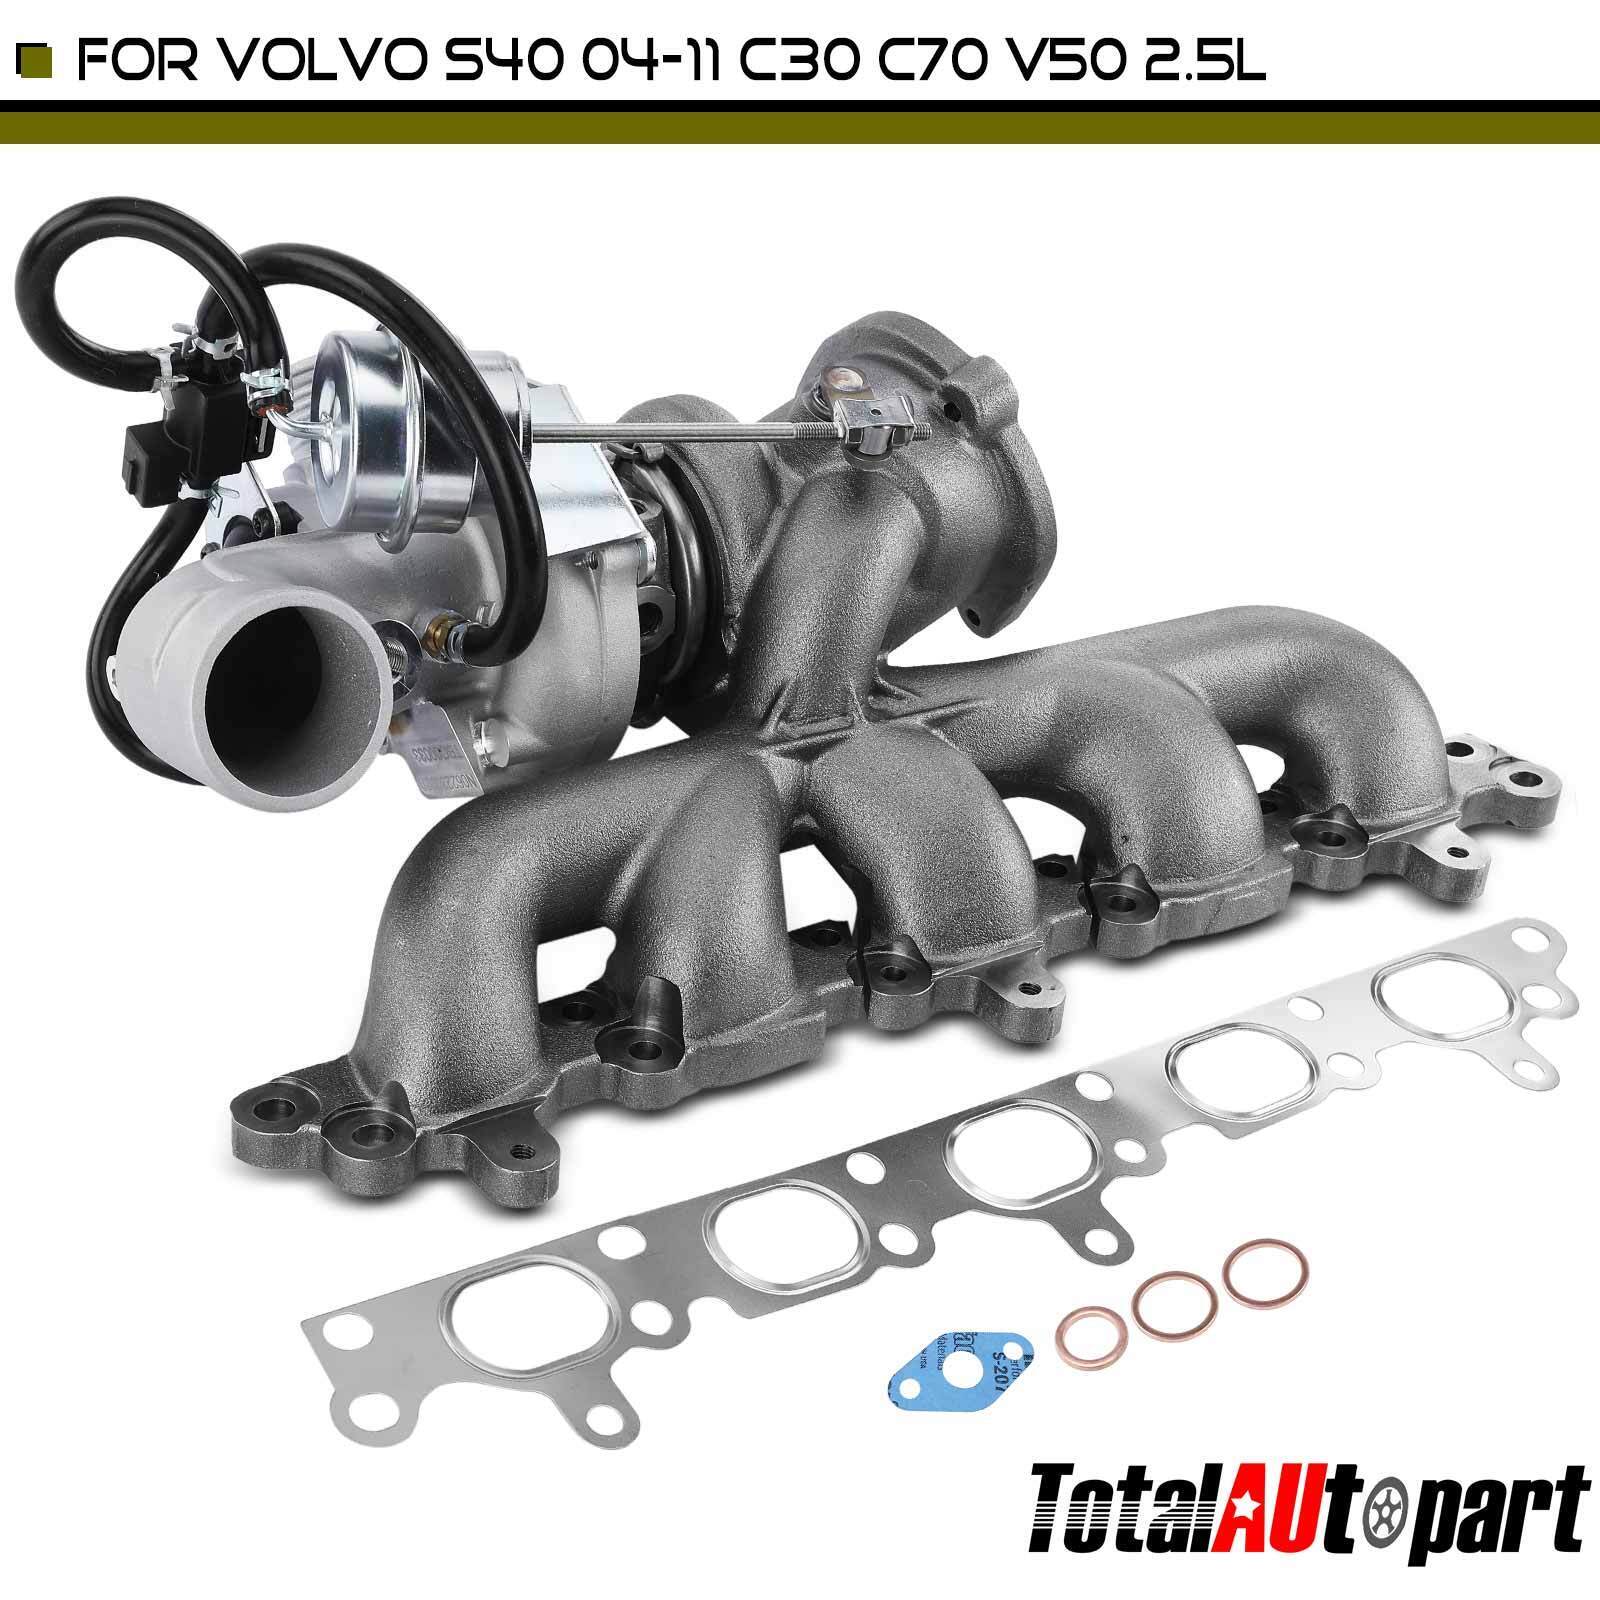 New Turbo Turbocharger w/ Exhaust Manifold for Volvo C30 2008-2013 C70 2006-2013